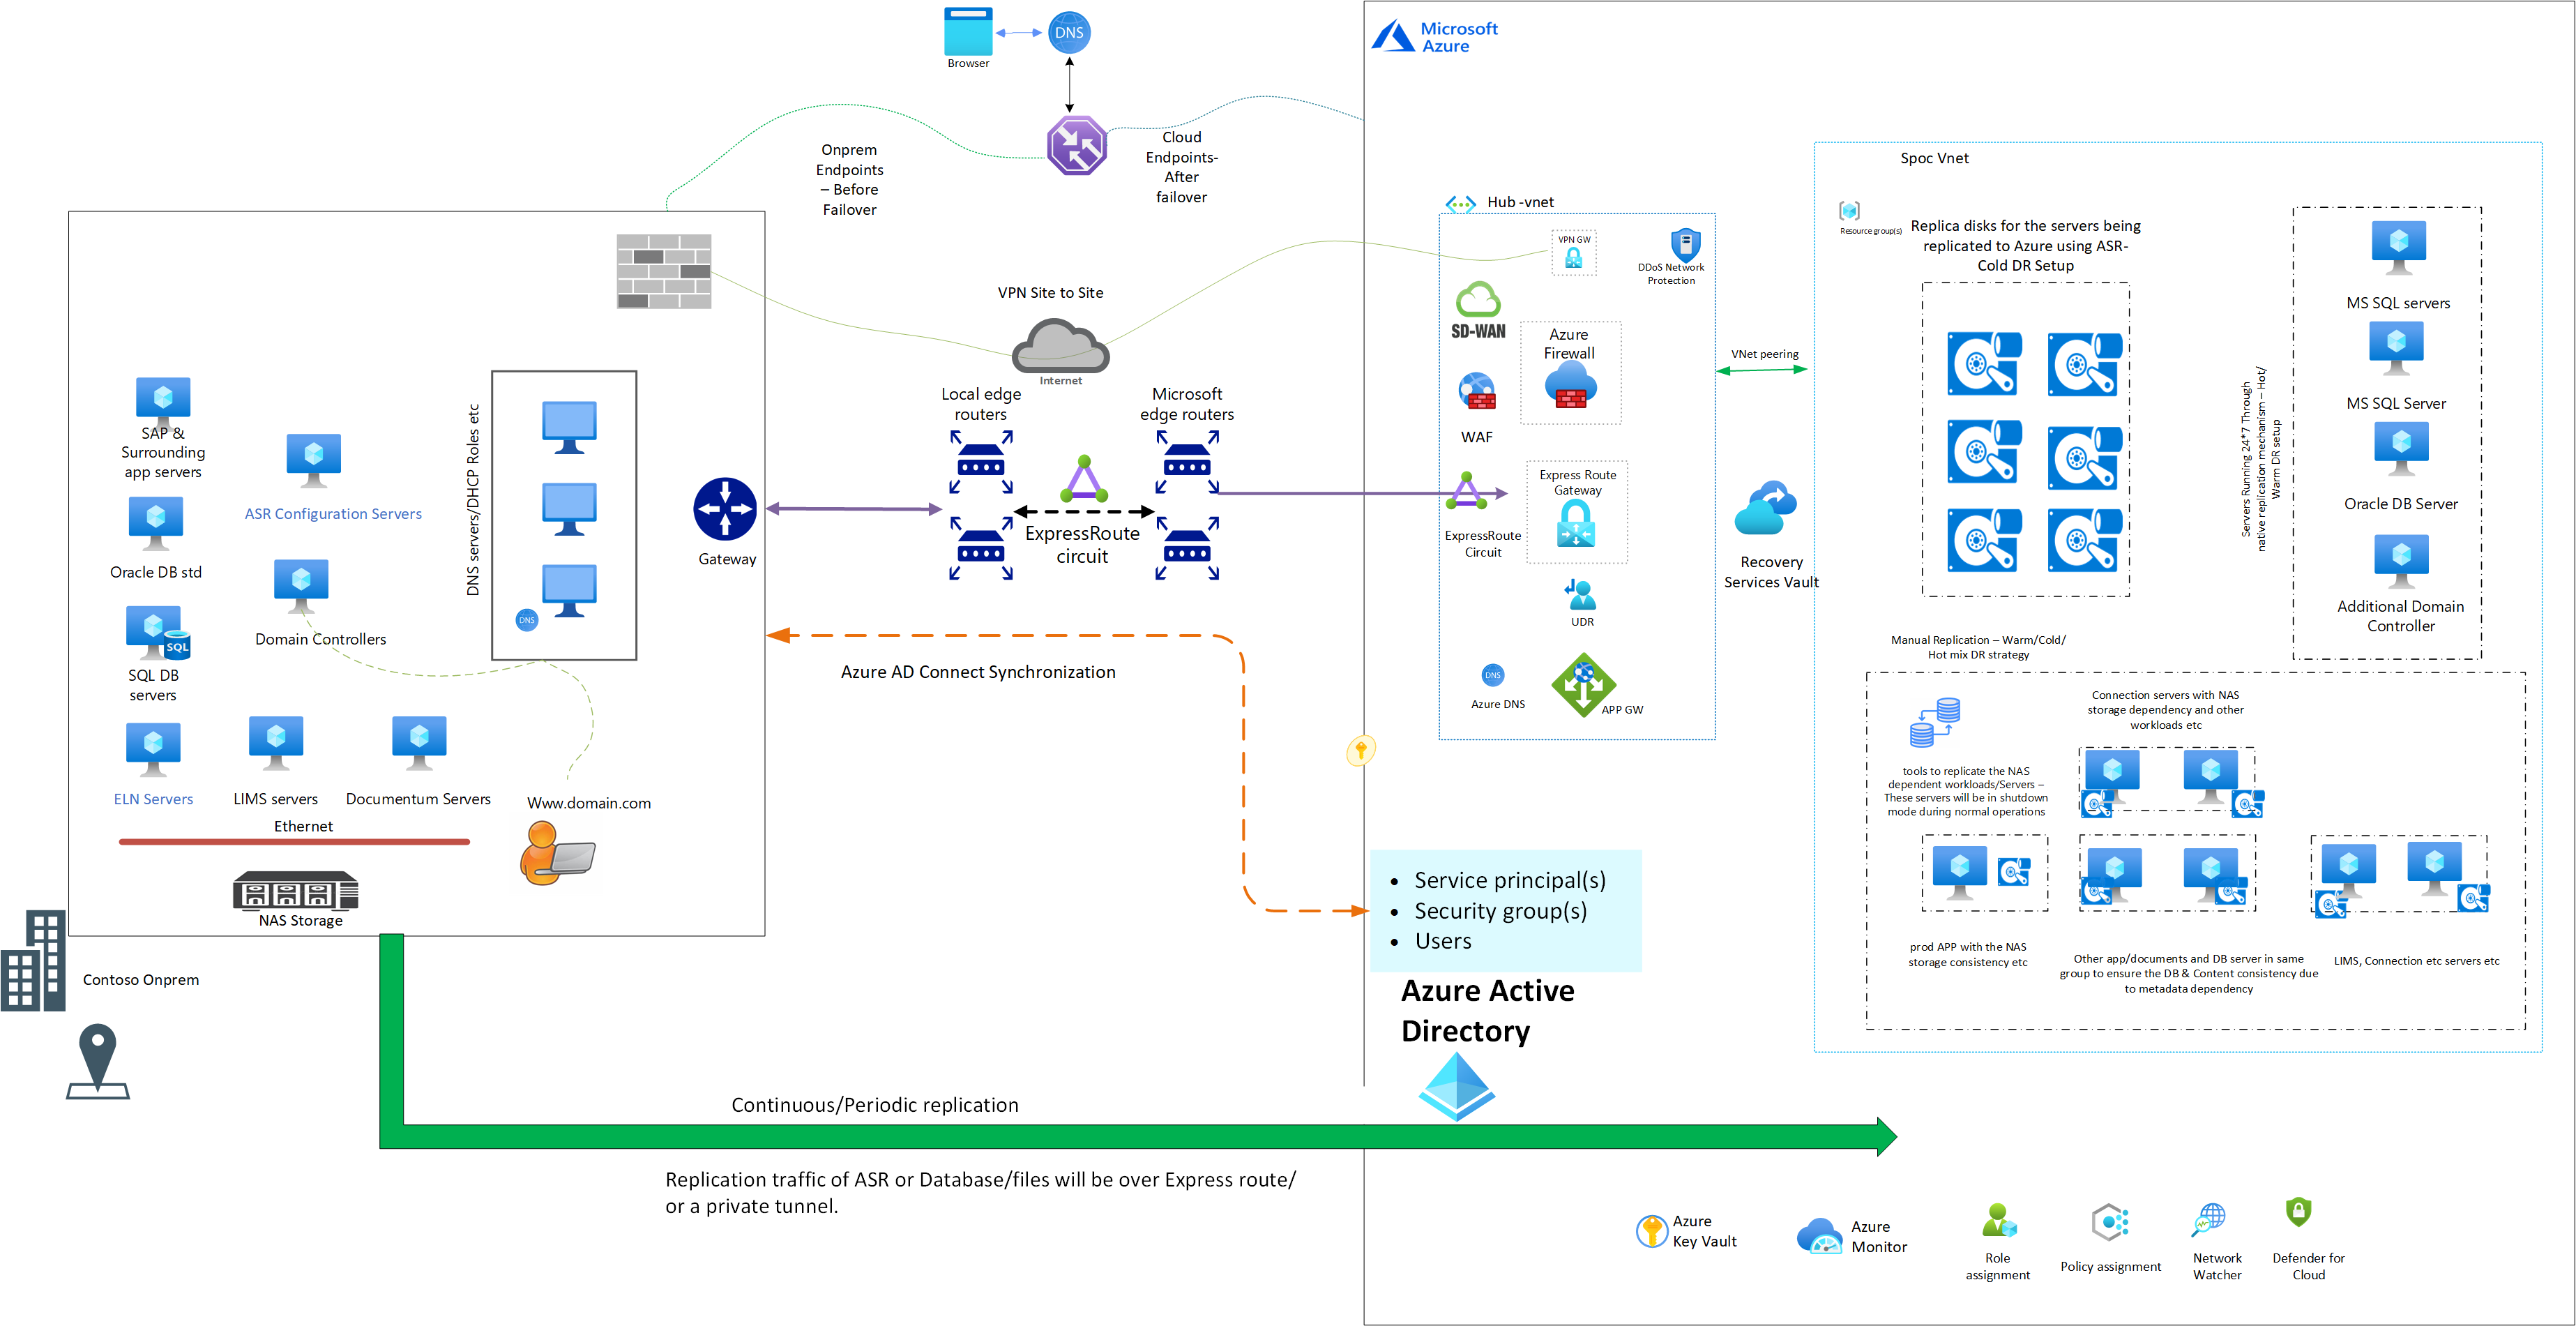 Business Continuity and Disaster Recovery for on-premises workloads in Microsoft Azure Cloud